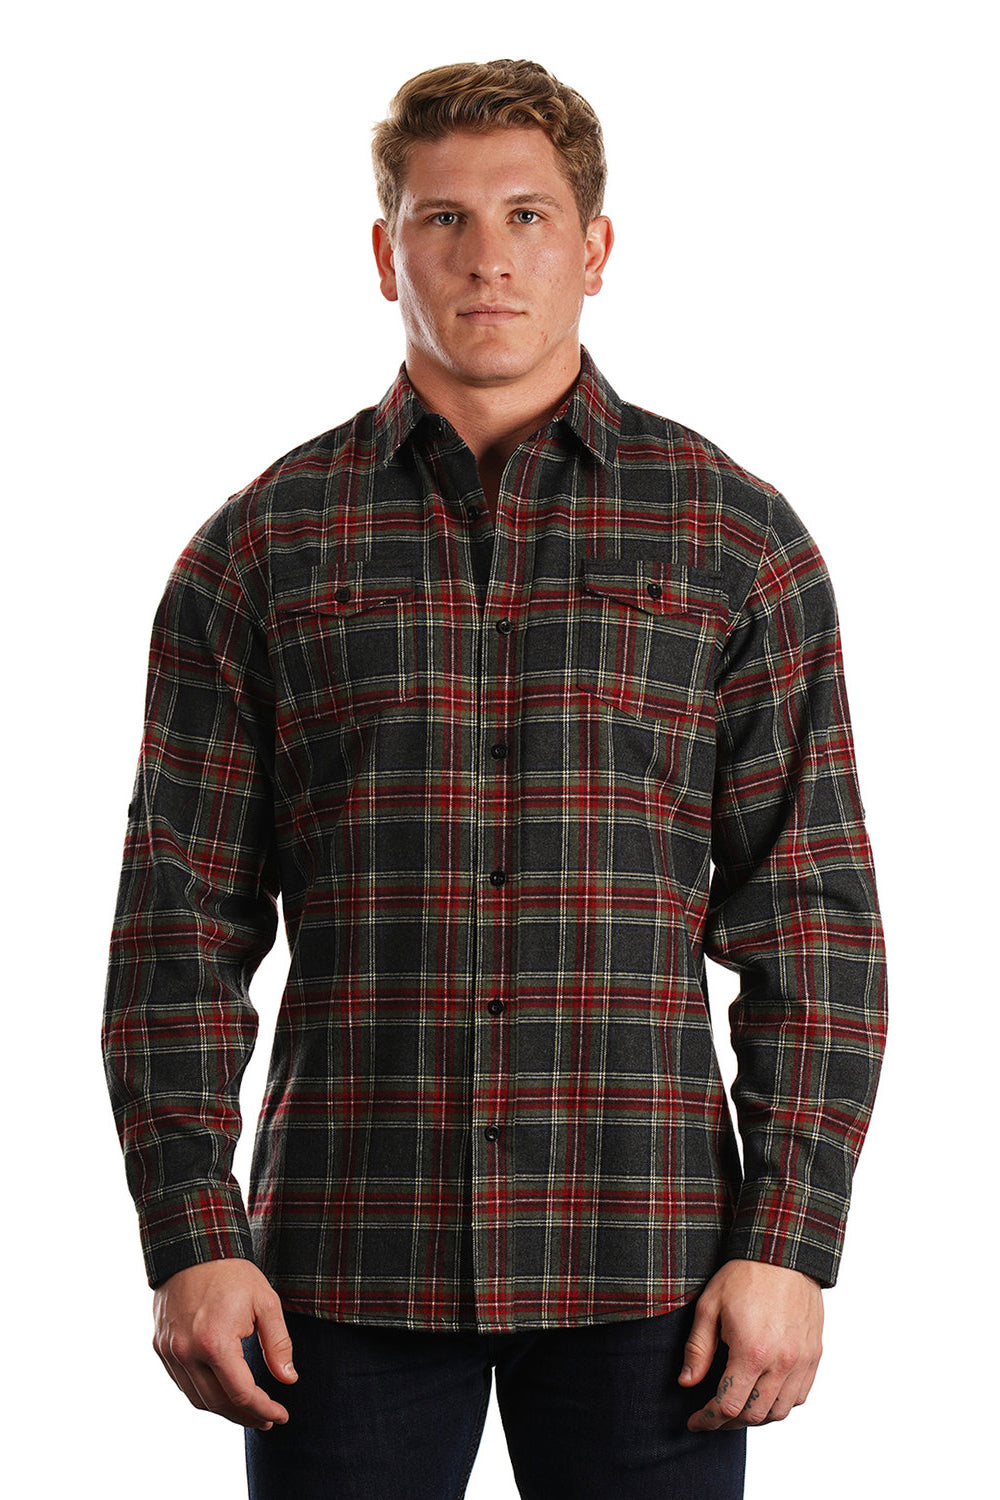 Burnside B8210/8210 Mens Flannel Long Sleeve Button Down Shirt w/ Double Pockets Grey/Red Front